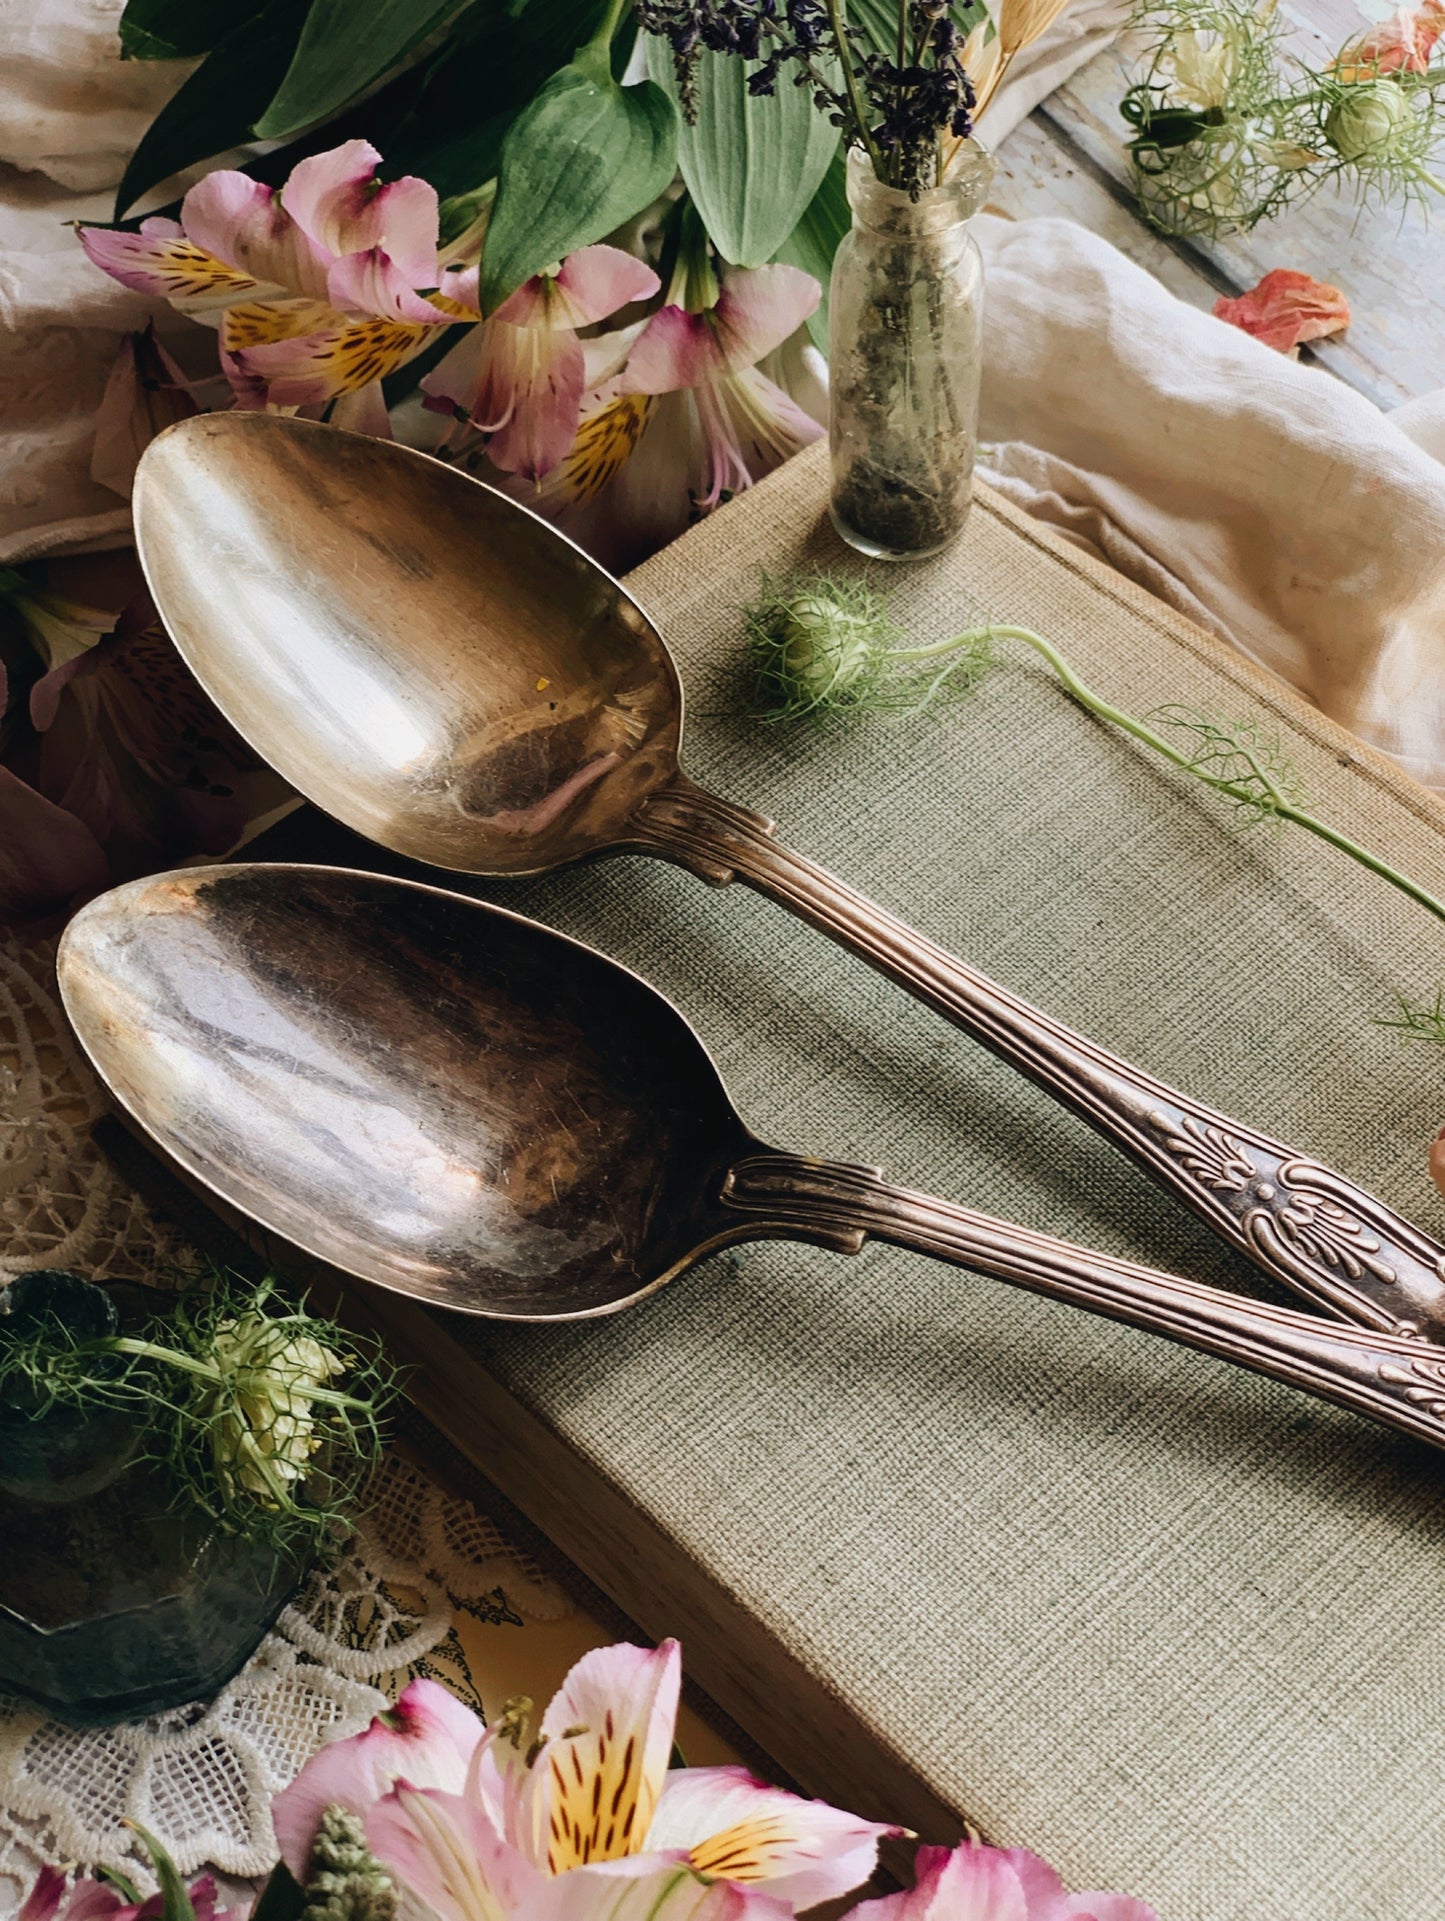 Large Antique EPNS Serving Spoon (two available sold separately)